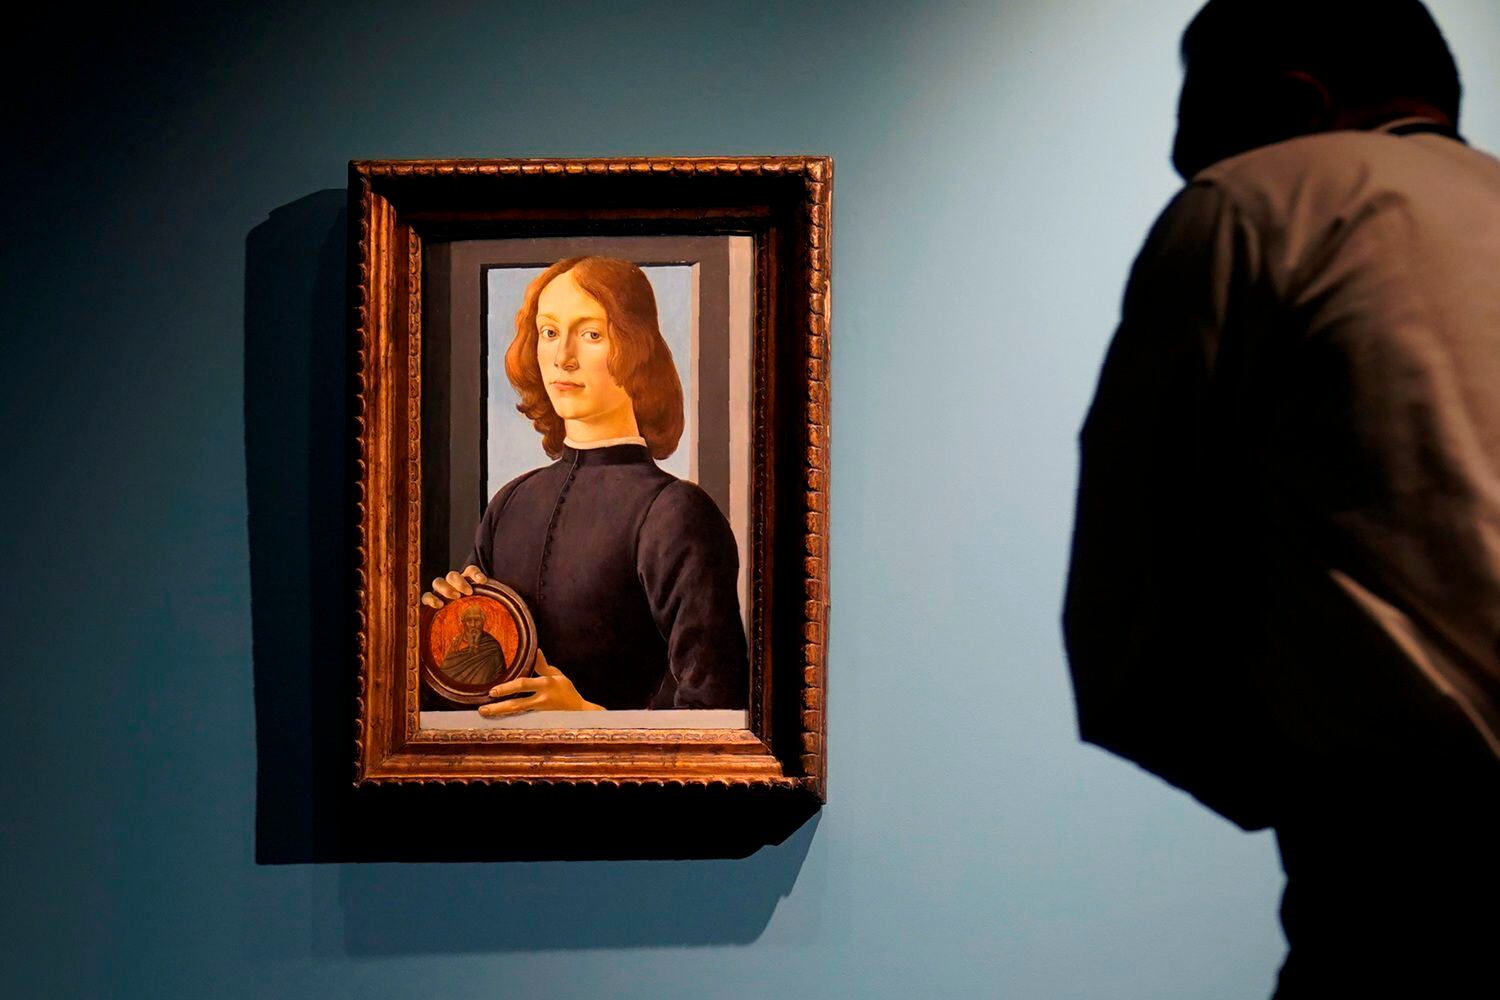 FILE — In this Sept. 23, 2020 file photo, Sandro Botticelli's 15th-century painting called "Young Man Holding a Roundel" is displayed at Sotheby’s, in New York. The small painting sold at Sotheby's in New York on Thursday, Jan, 28, 2021, for $92.2 million, an auction record for the Renaissance master. (AP Photo/Seth Wenig, File)                                                                                                                                                        